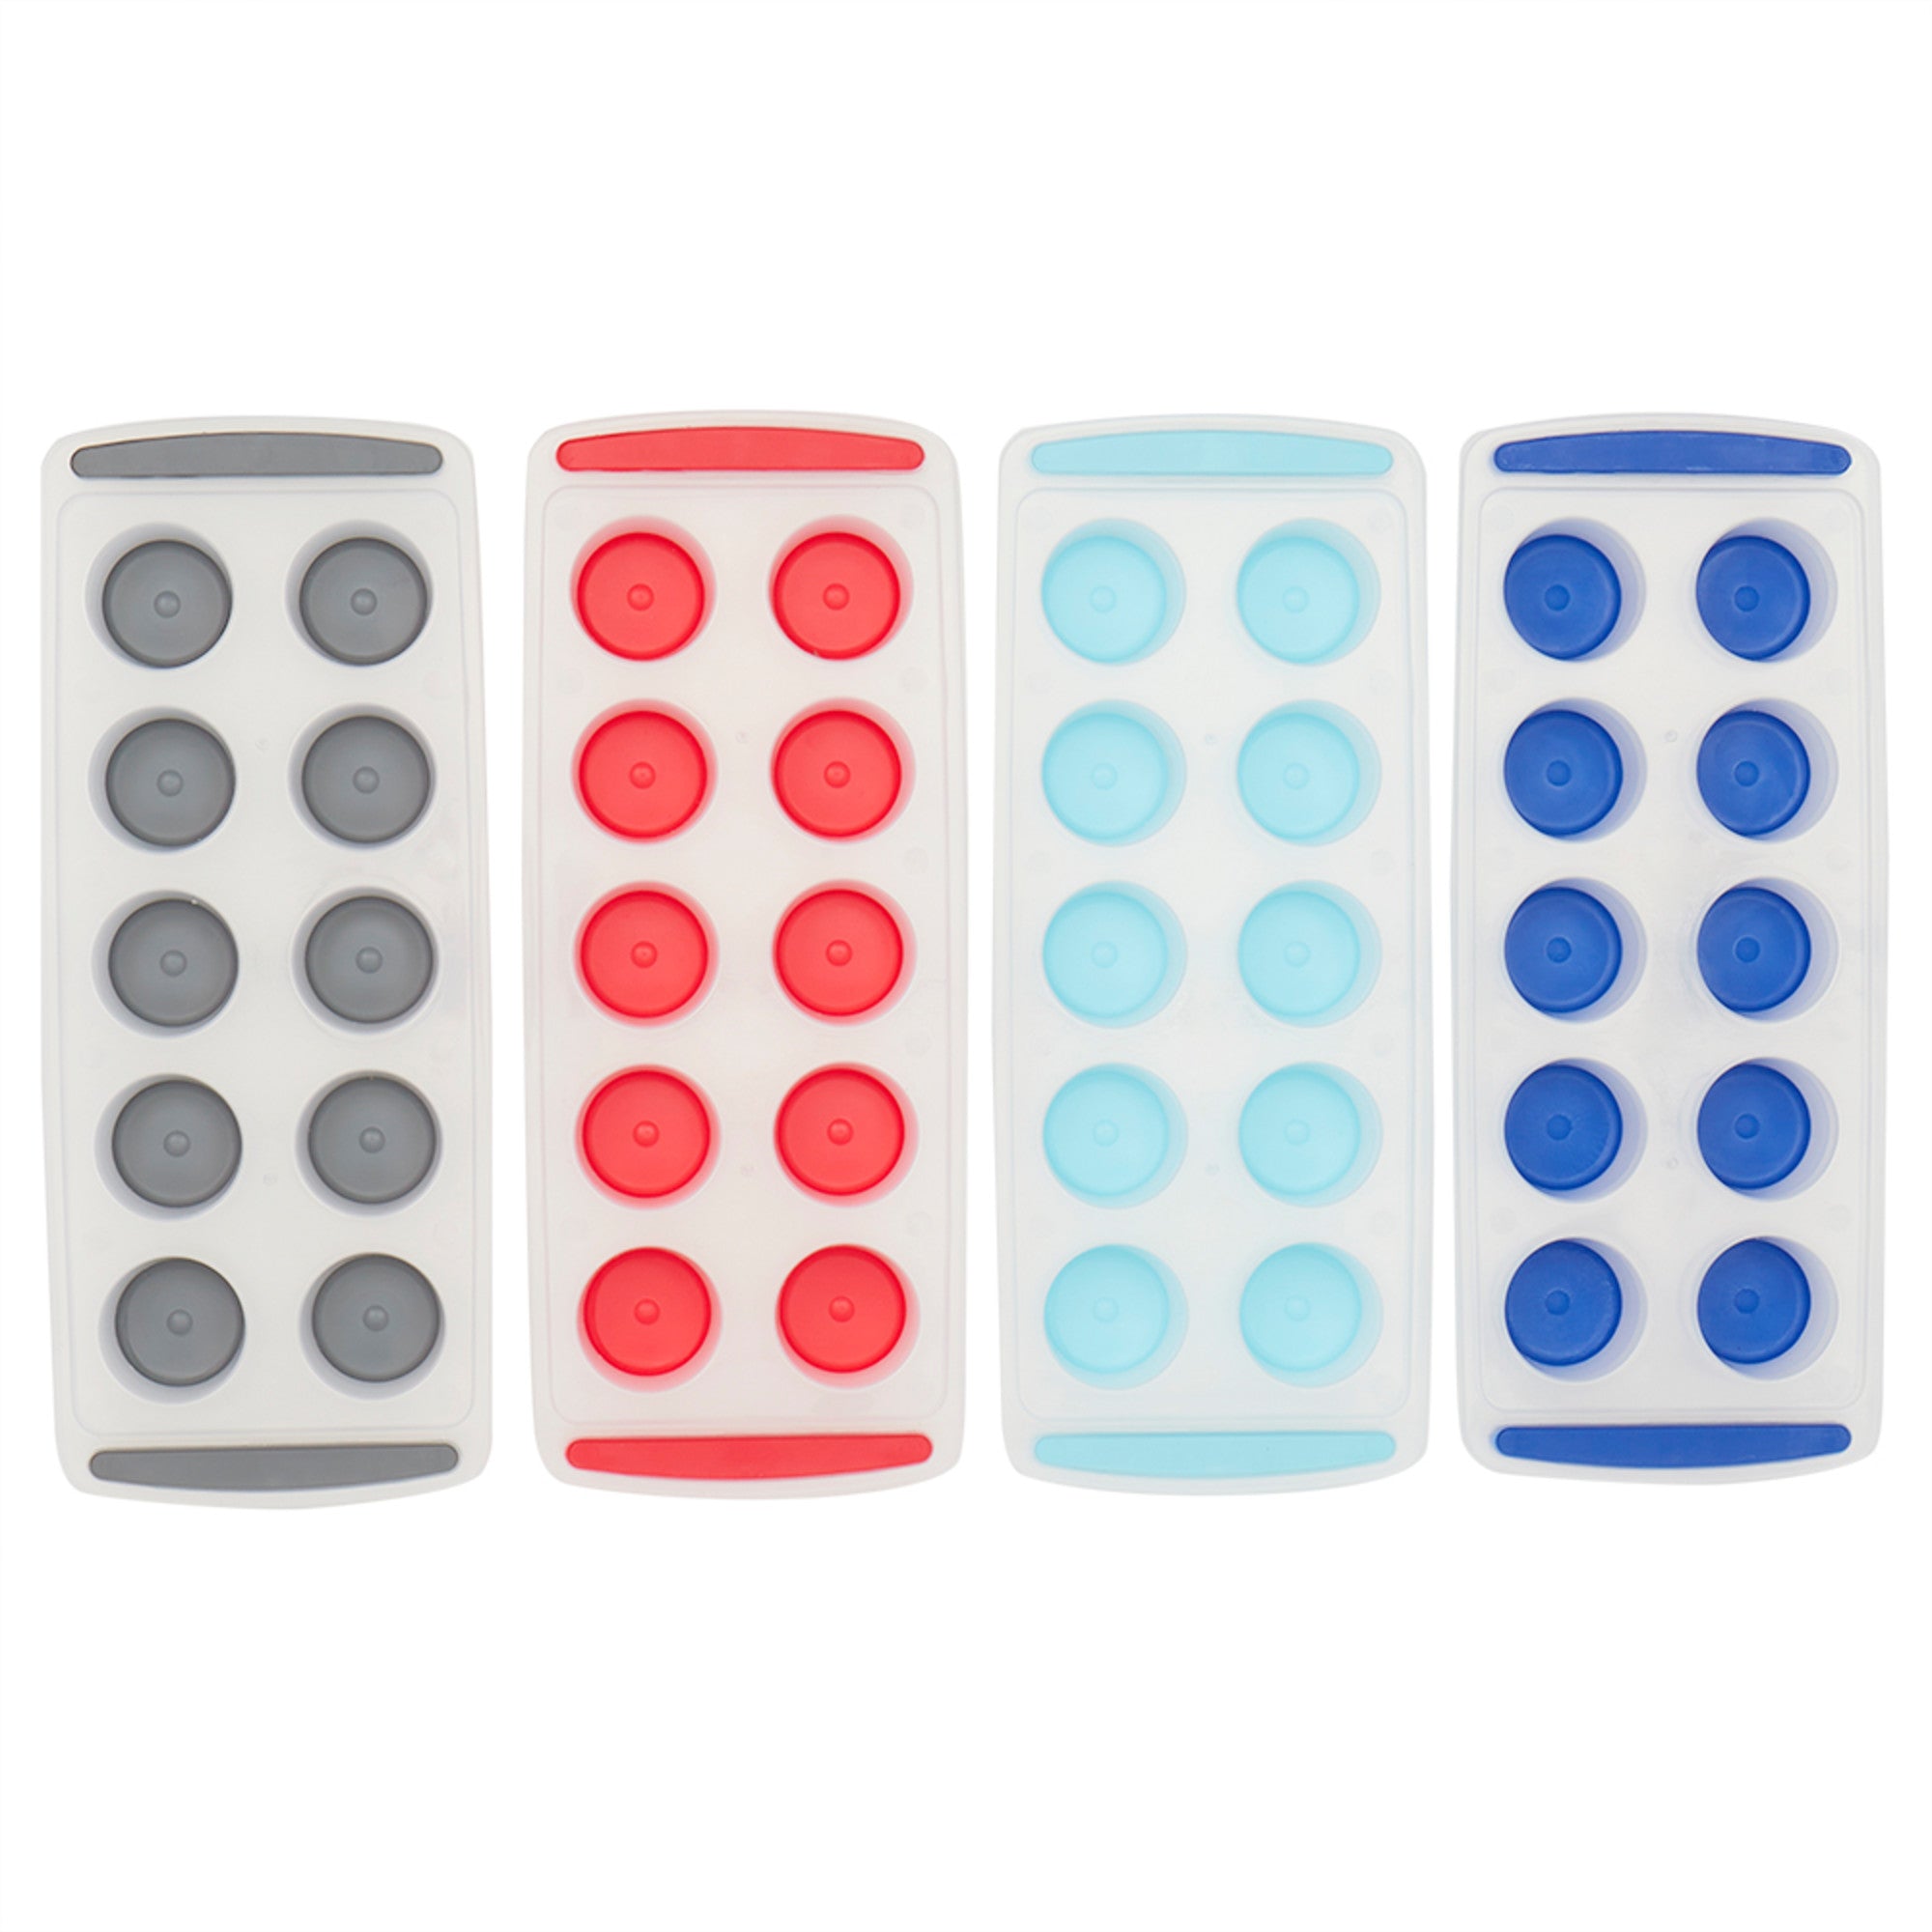 Home Basics Ice Cube Tray with Round Compartments, (Pack of 2) - Assorted Colors